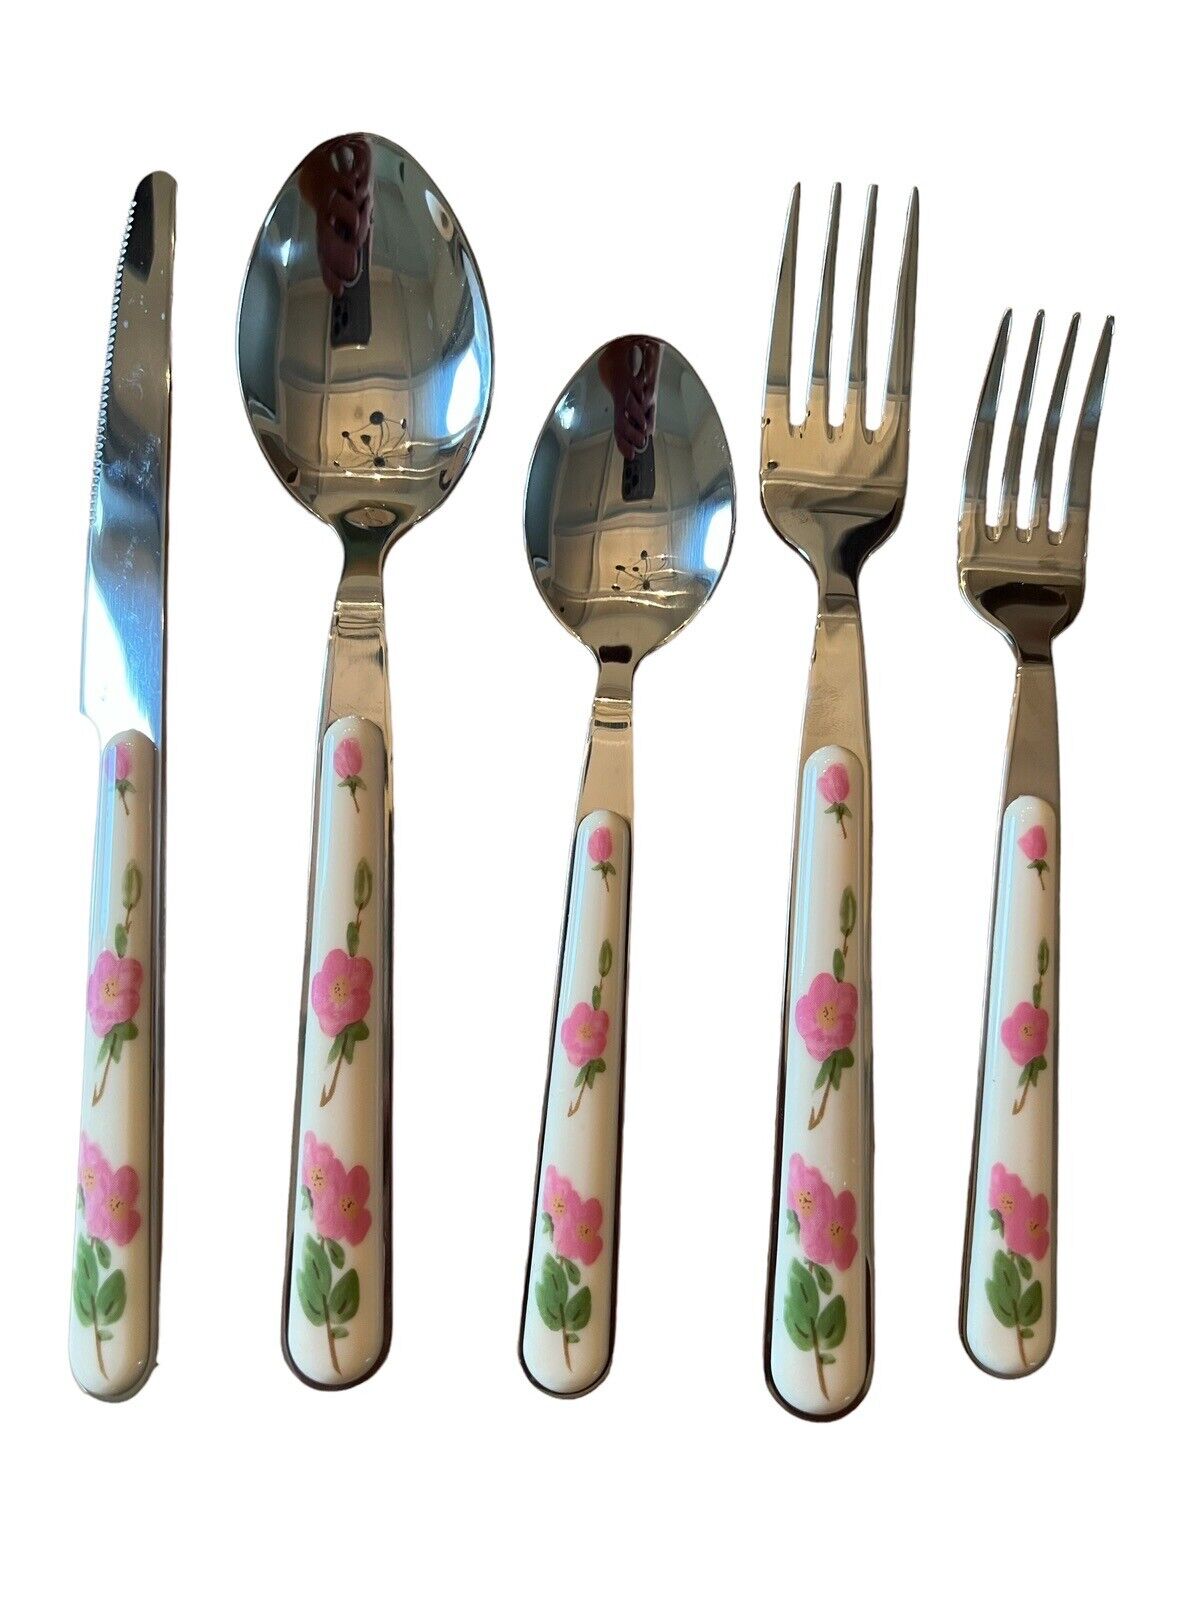 New Franciscan Desert Rose Flatware. 5-piece Place Settings Rare Never Used